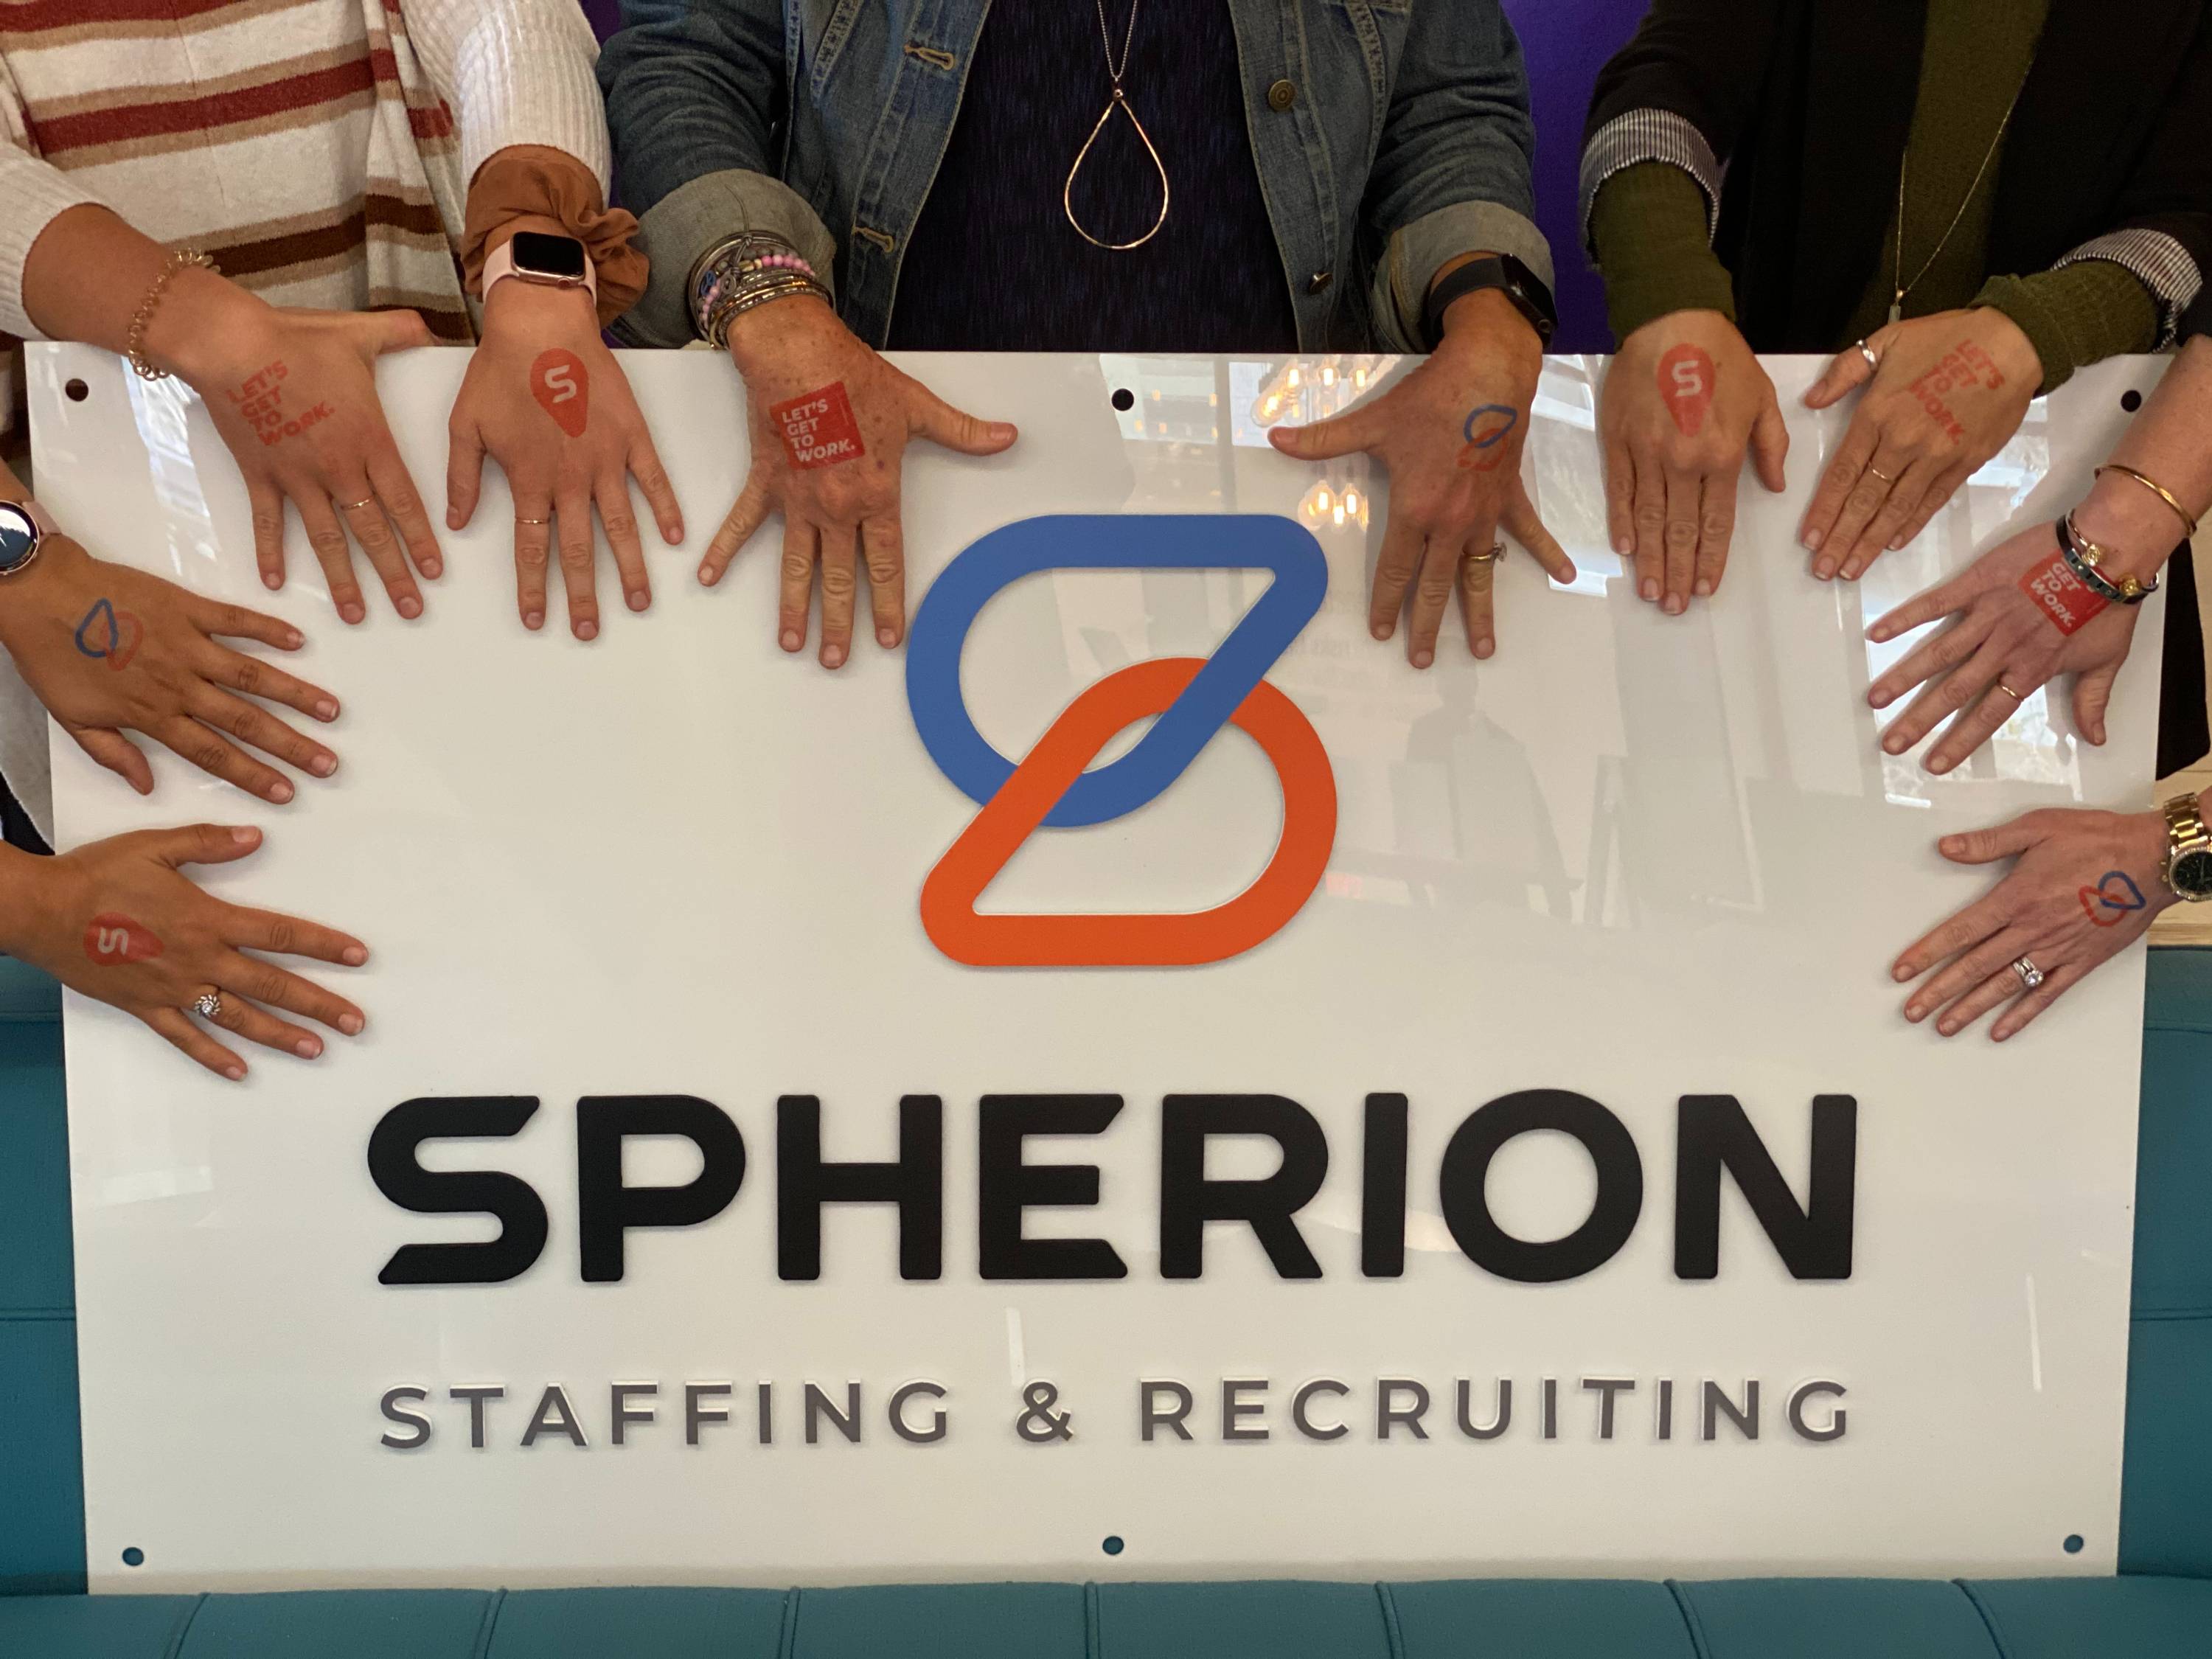 Hands surrounding a white Spherion logo sign